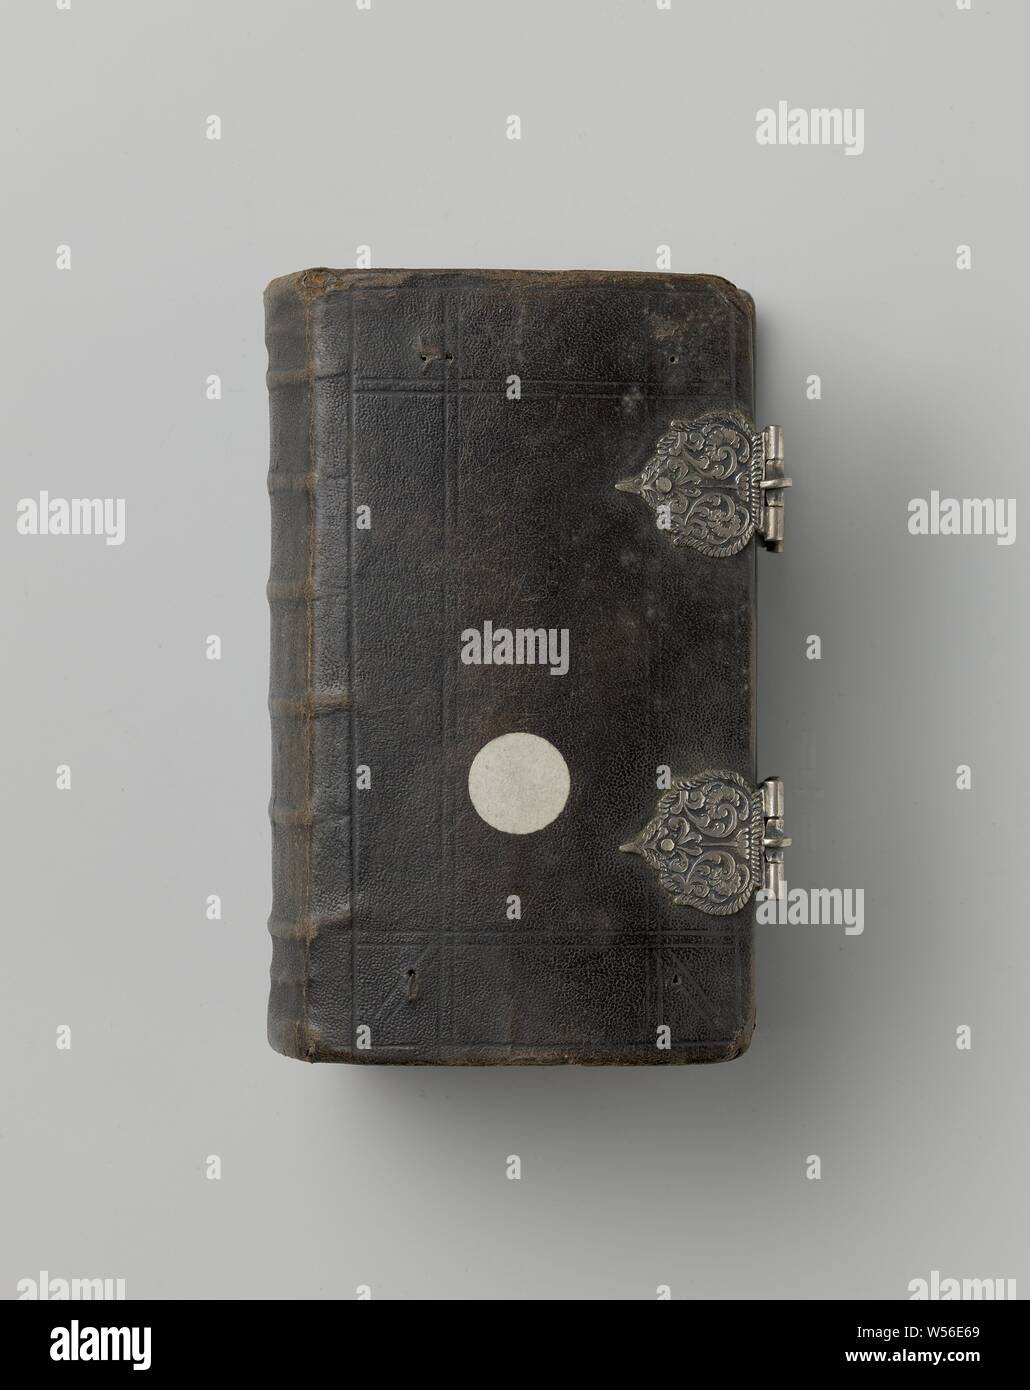 Bible with cast and worked-up small locks of silver, Bible with cast and worked-up small locks of silver. Leather band., anonymous, c. 1700 - c. 1800, paper, silver (metal), leather, h 14.5 cm × w 9.5 cm Stock Photo